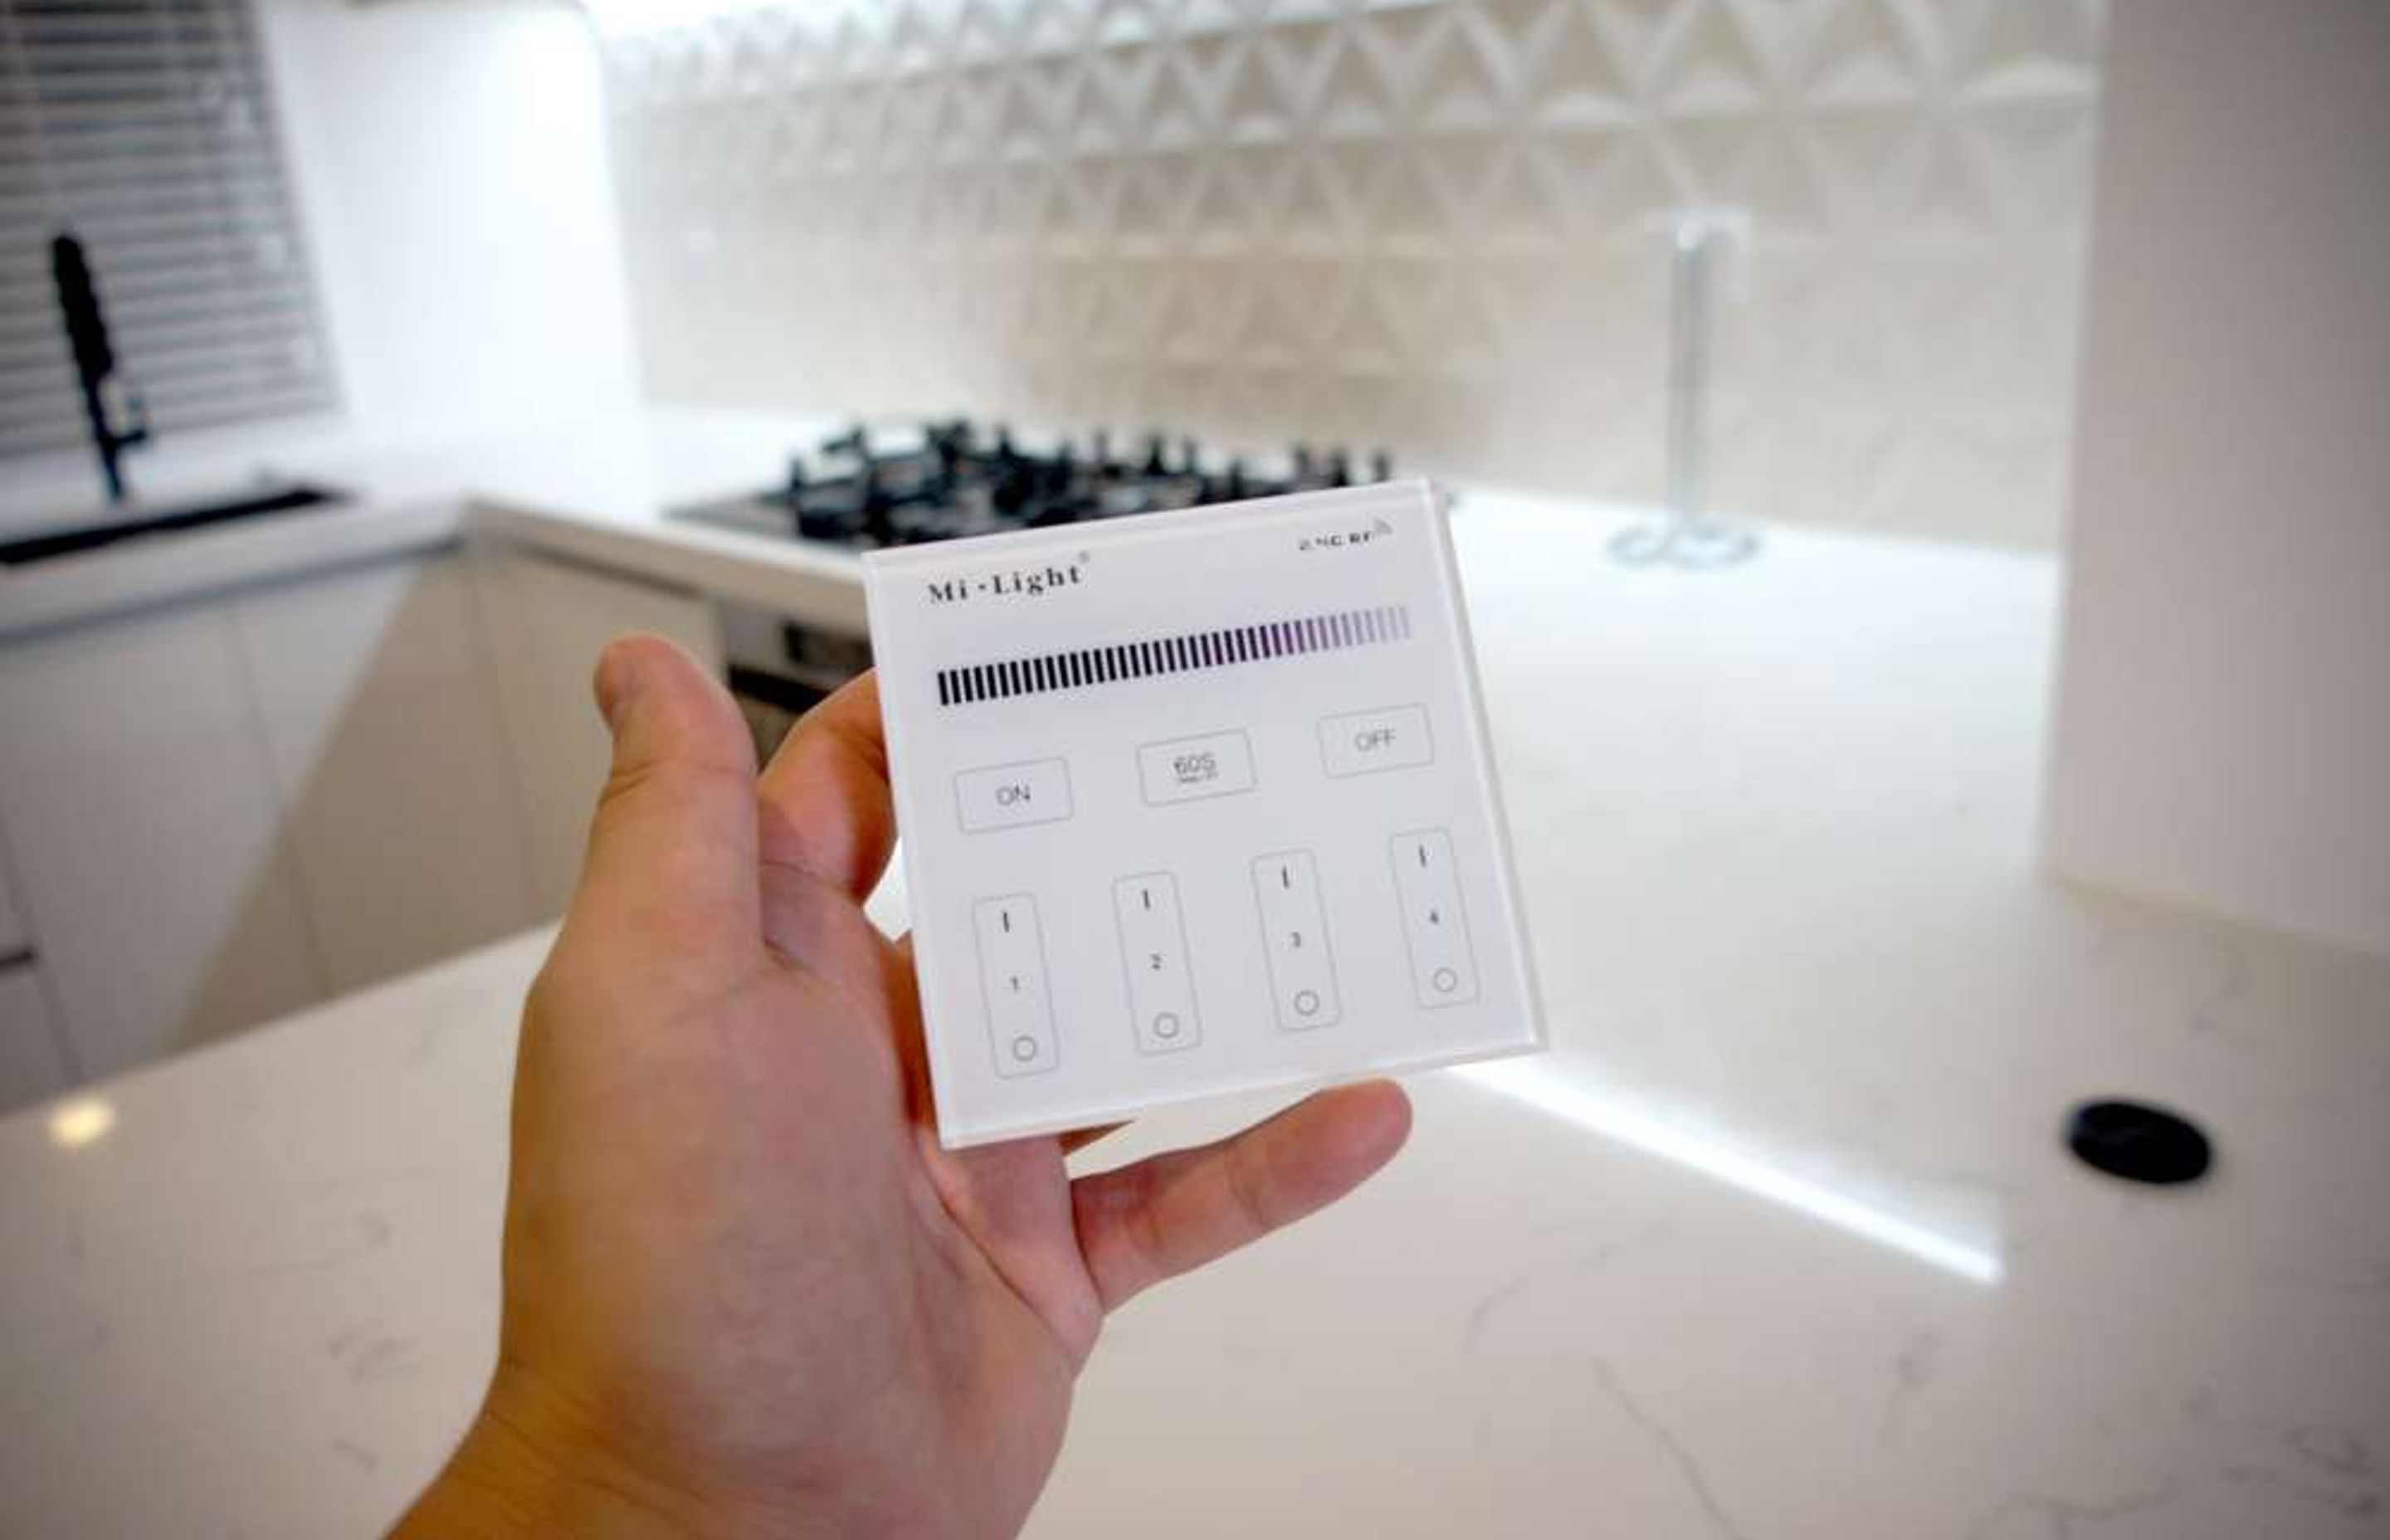 All LED lights in this kitchen can be made dimmer or brighter with this central remote